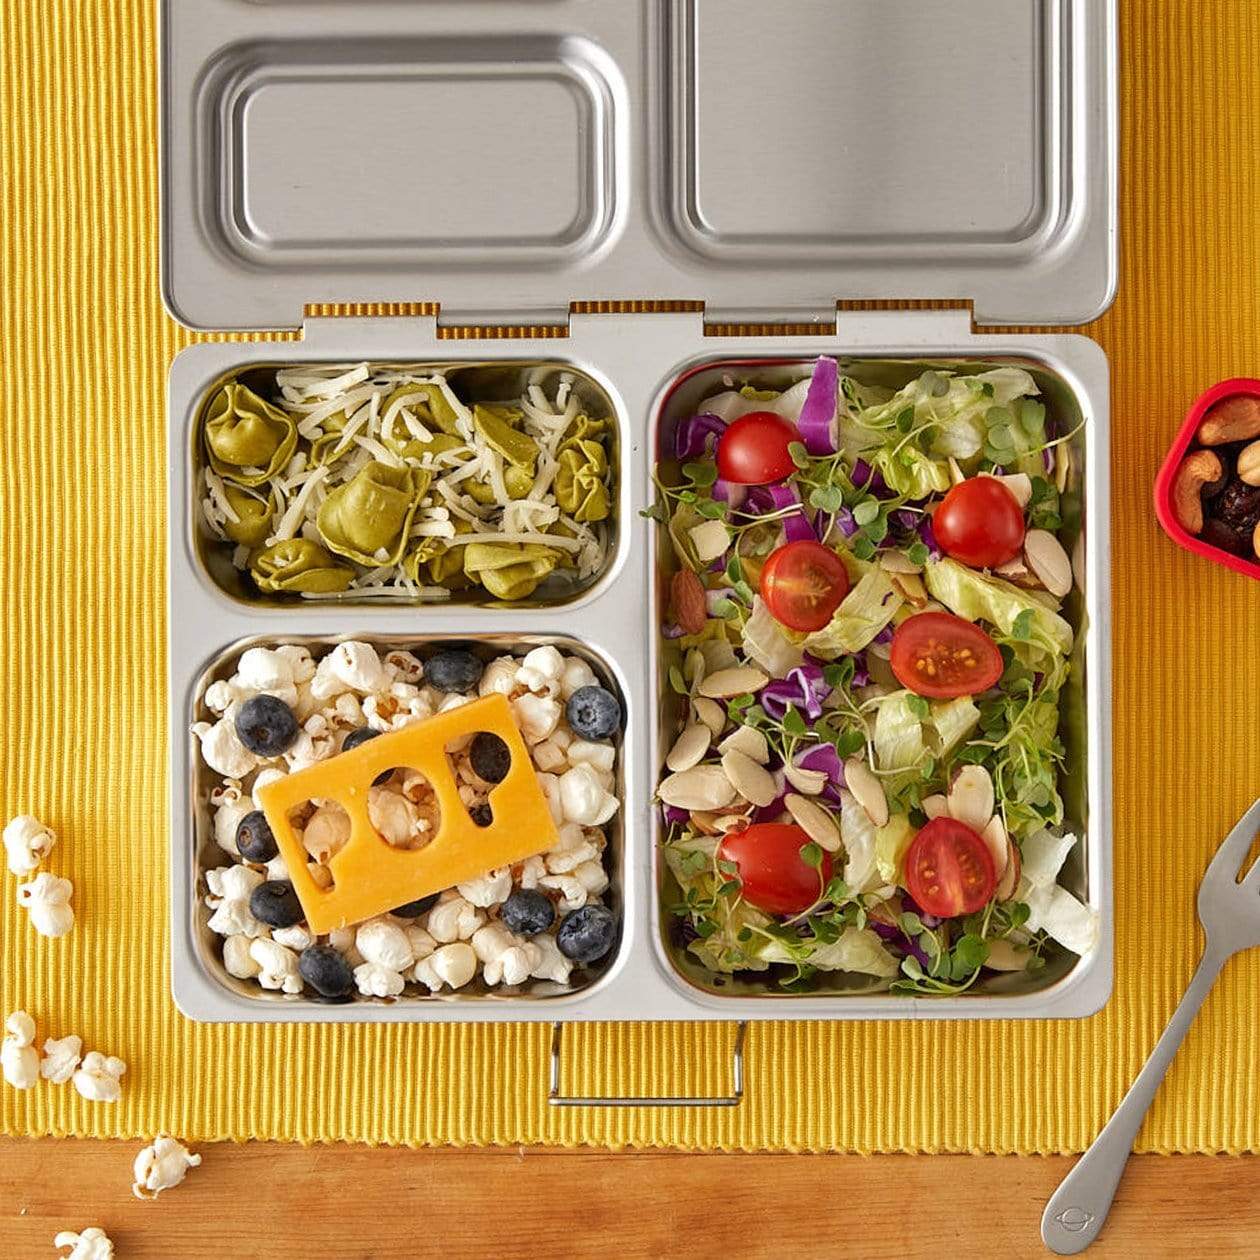 Planet Box Launch Lunchbox, an eco friendly and plastic free lunchbox sold at Thread Spun